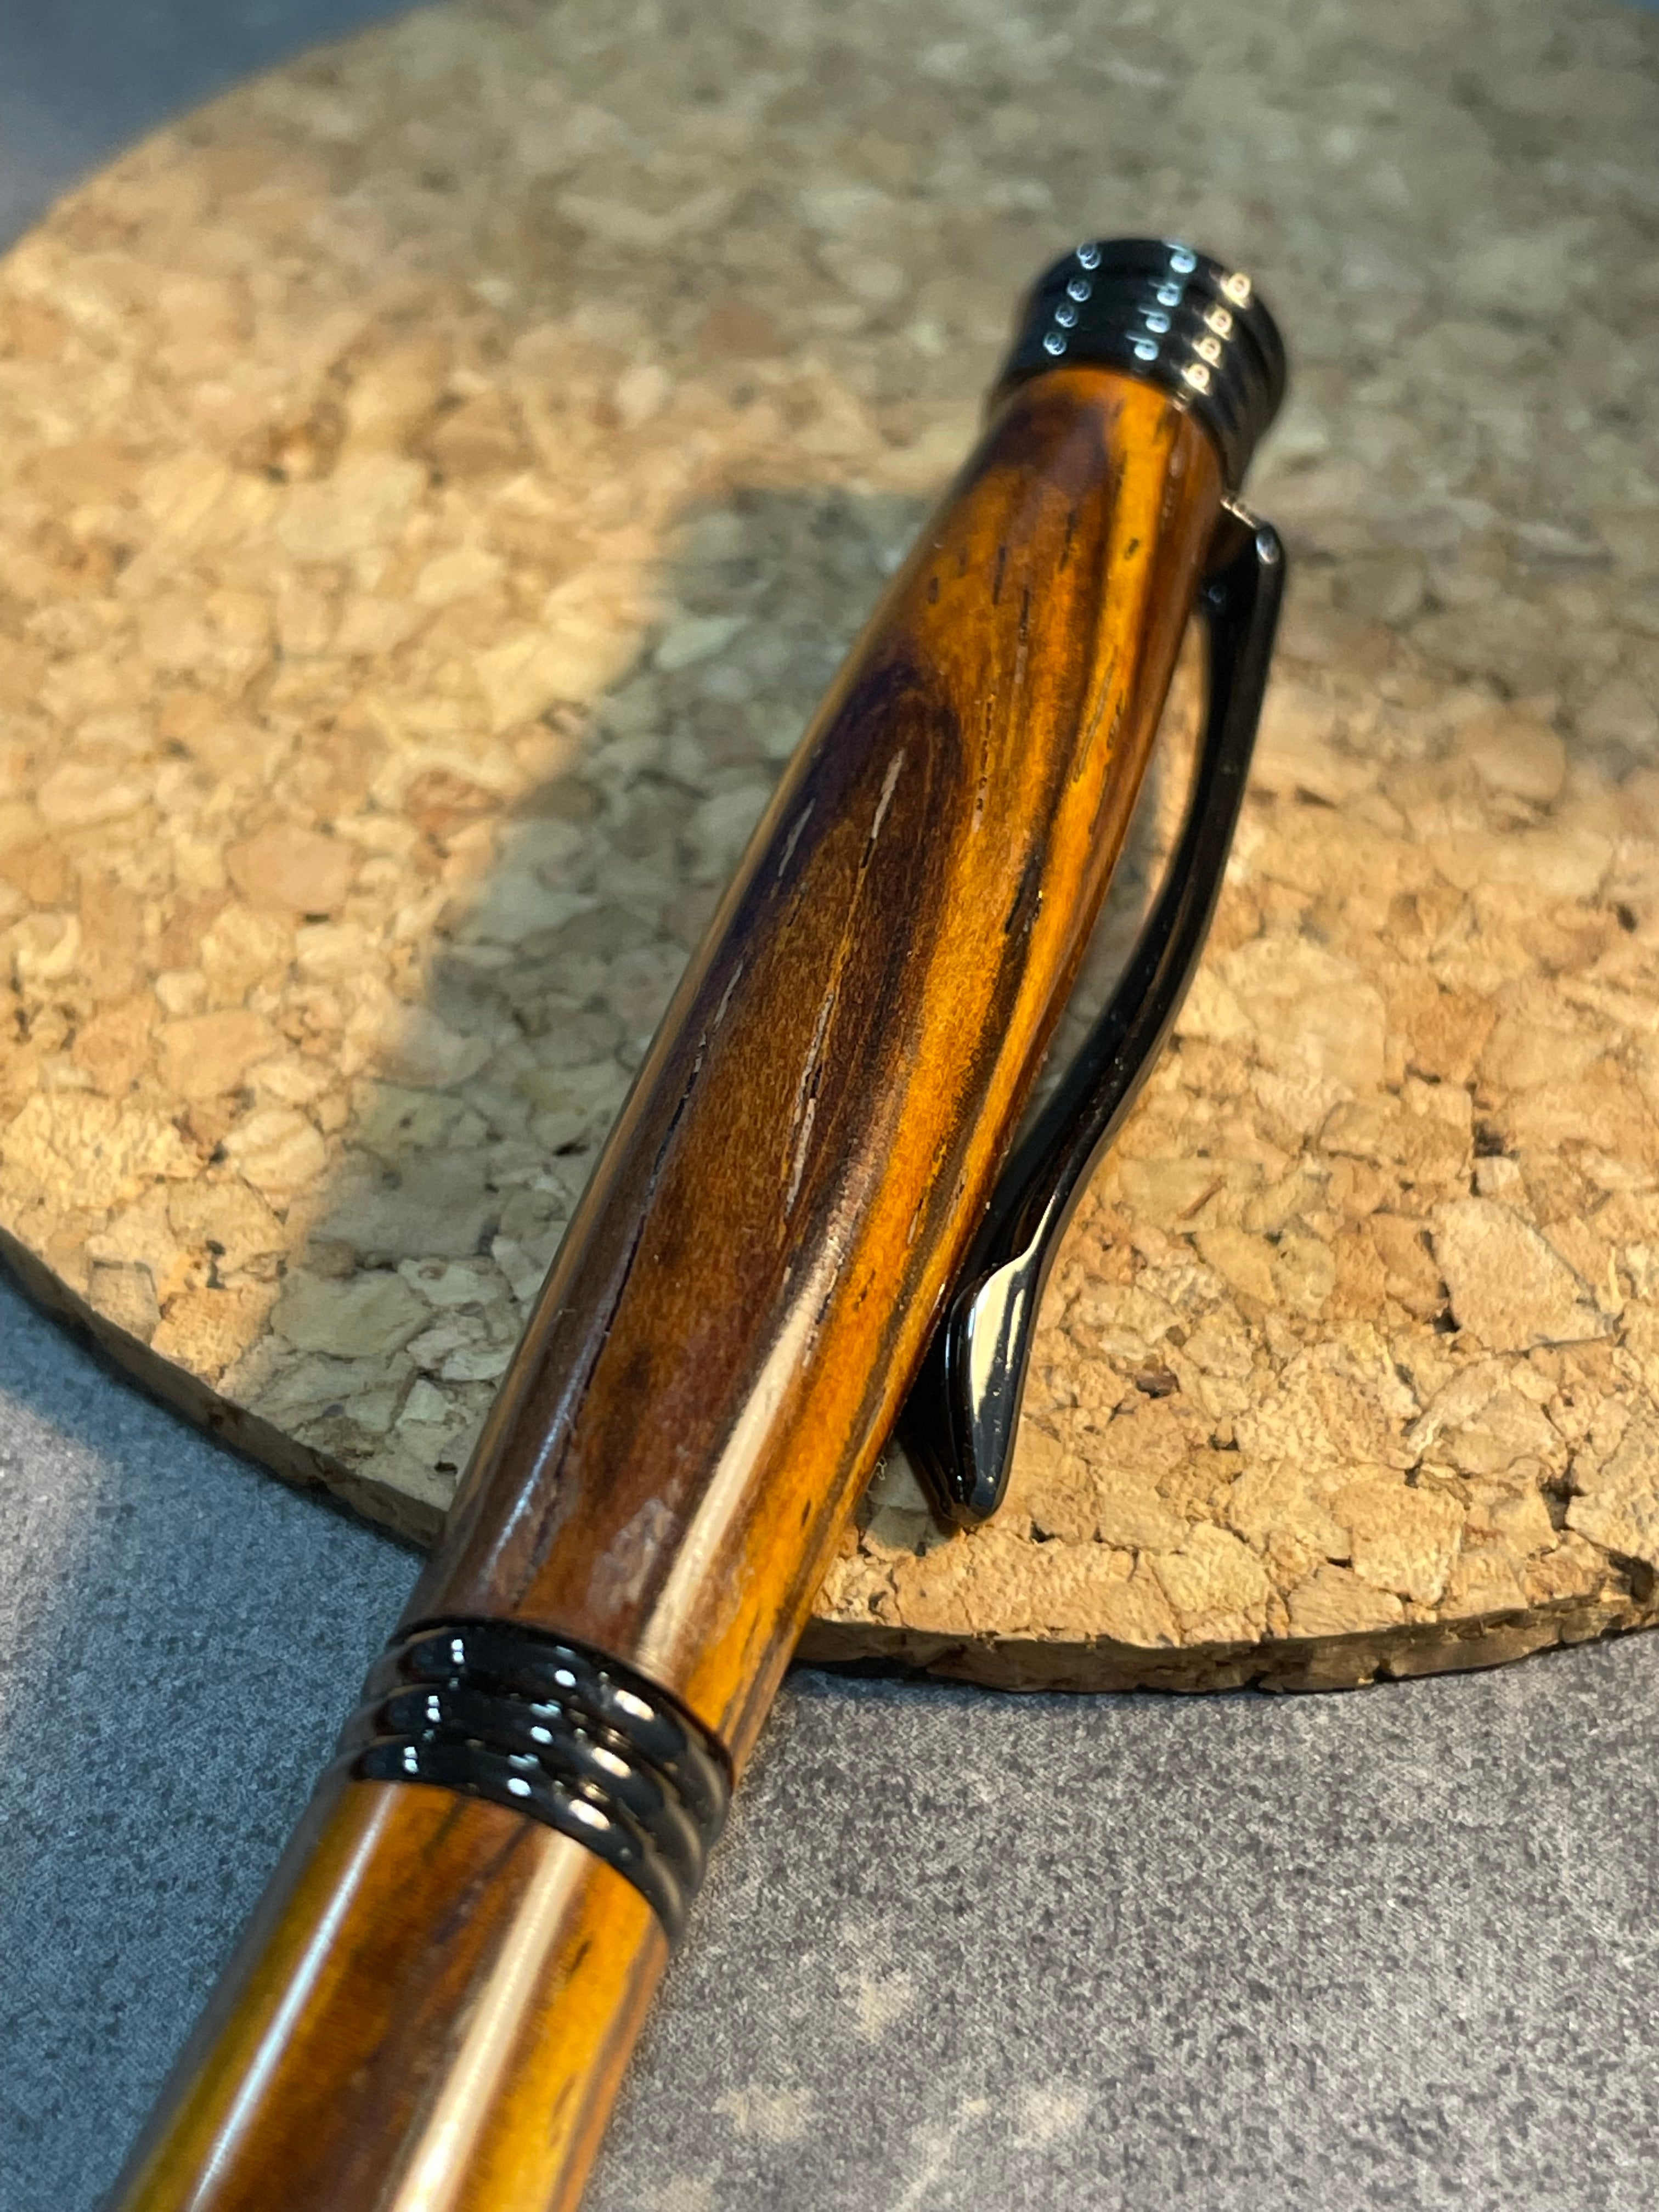 Handmade Wooden Pen from Rare Cocobolo Wood and Charcoal Details - EndlessWood